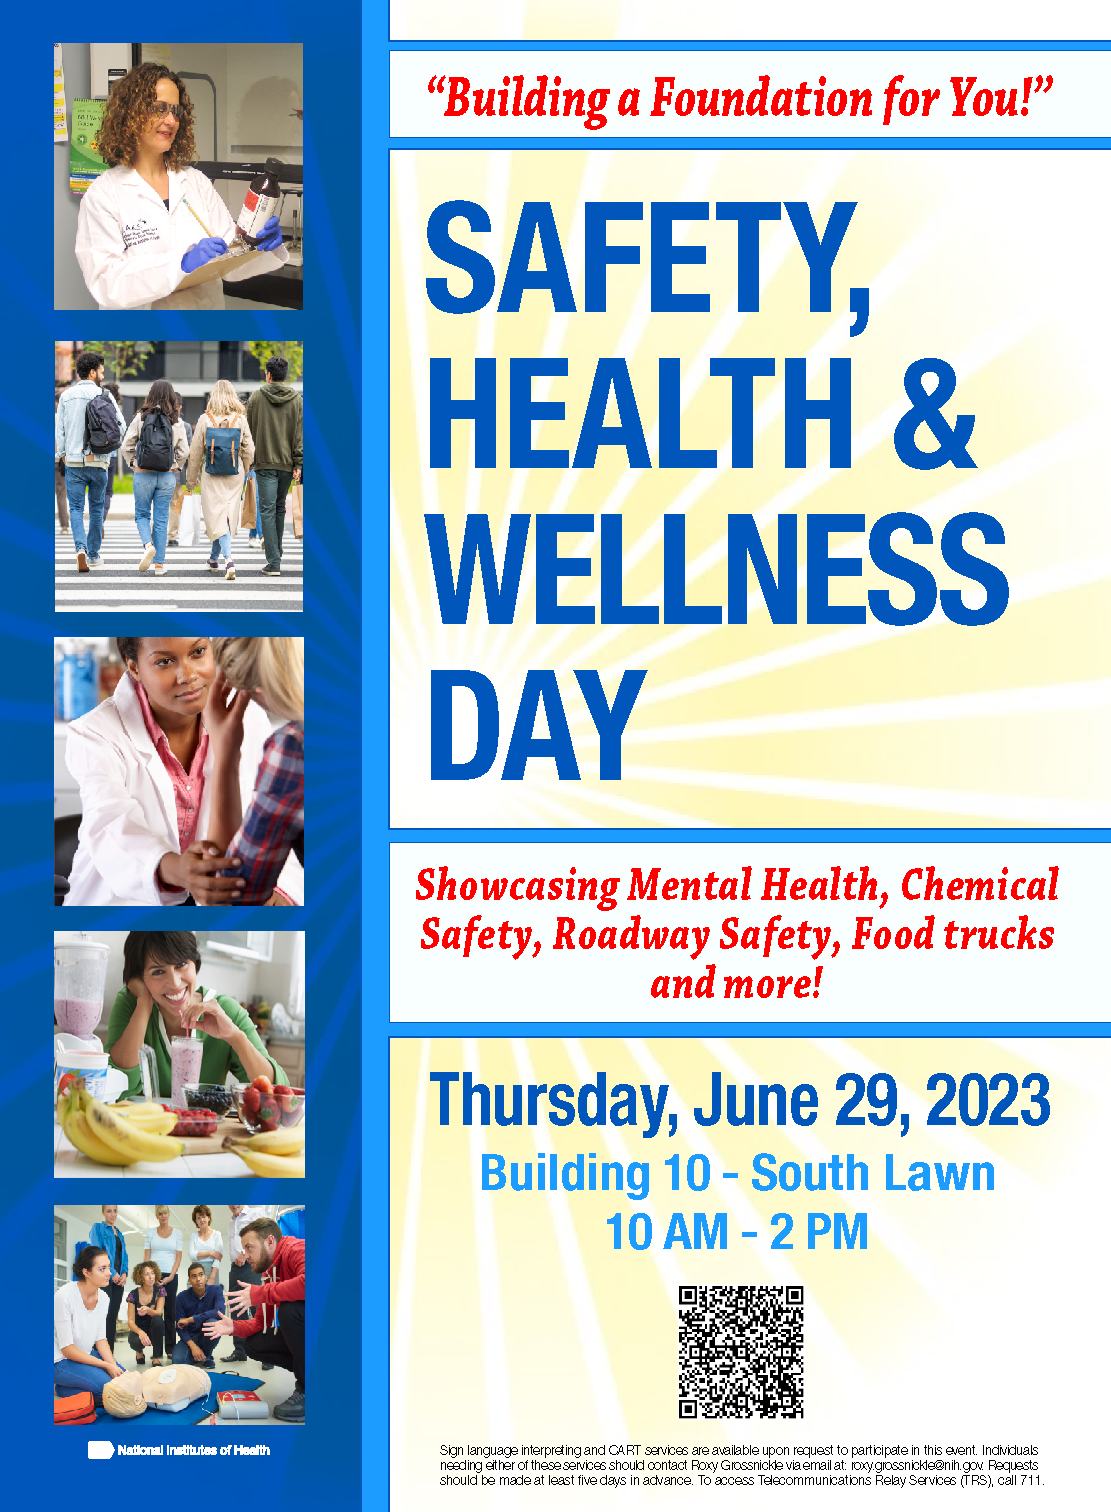 SAFETY,HEALTH & WELLNESS DAY SAFETY,